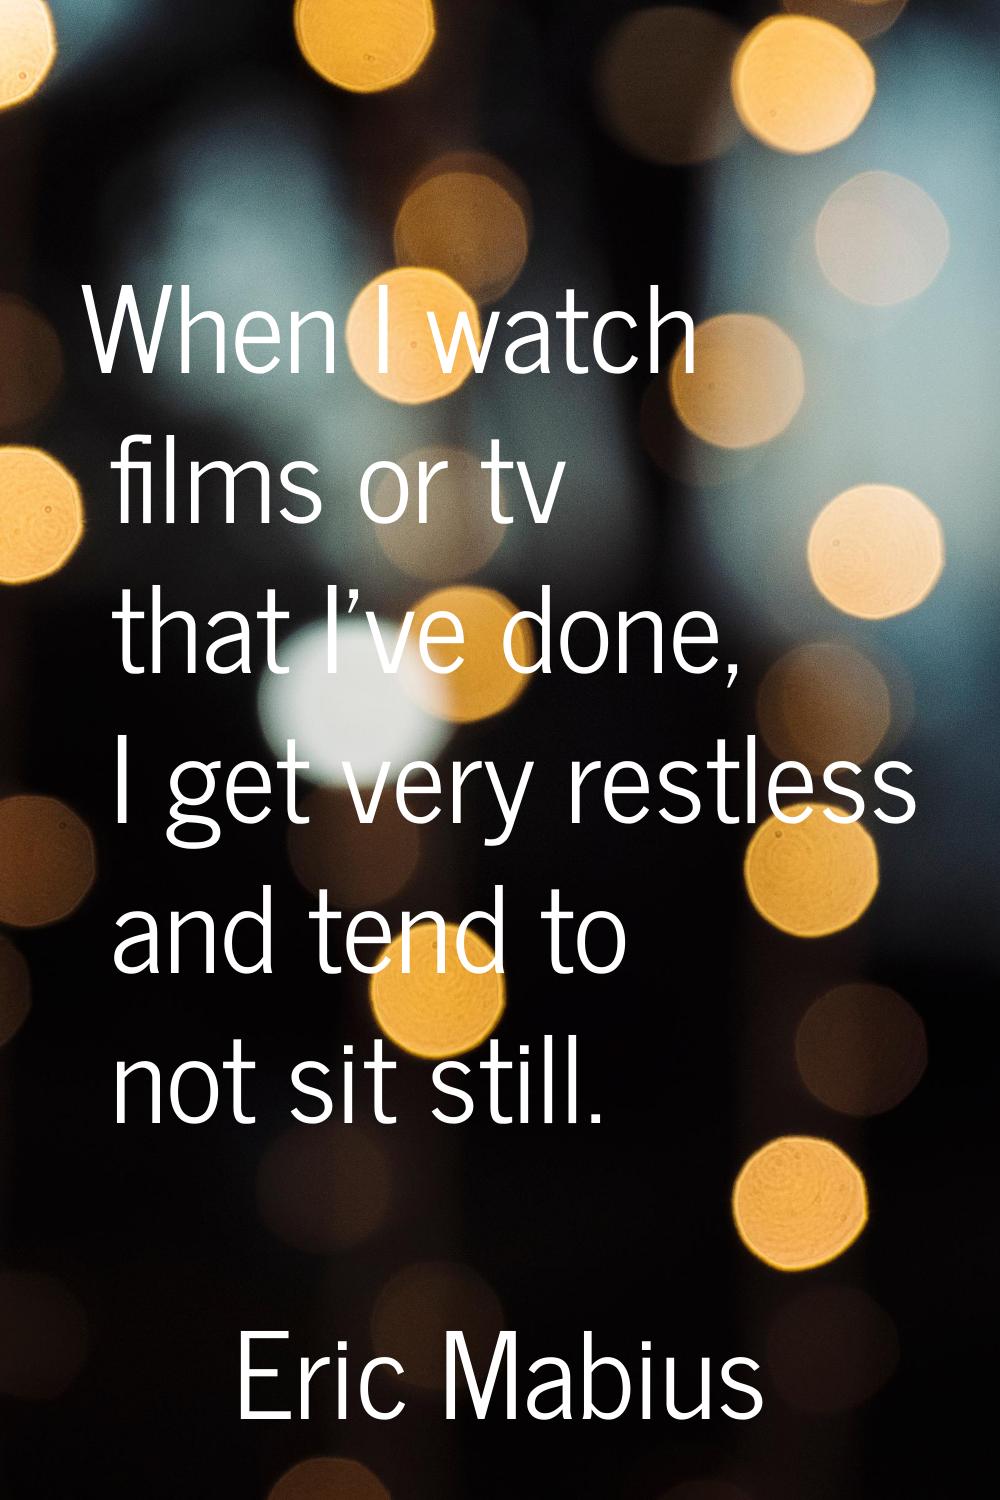 When I watch films or tv that I've done, I get very restless and tend to not sit still.